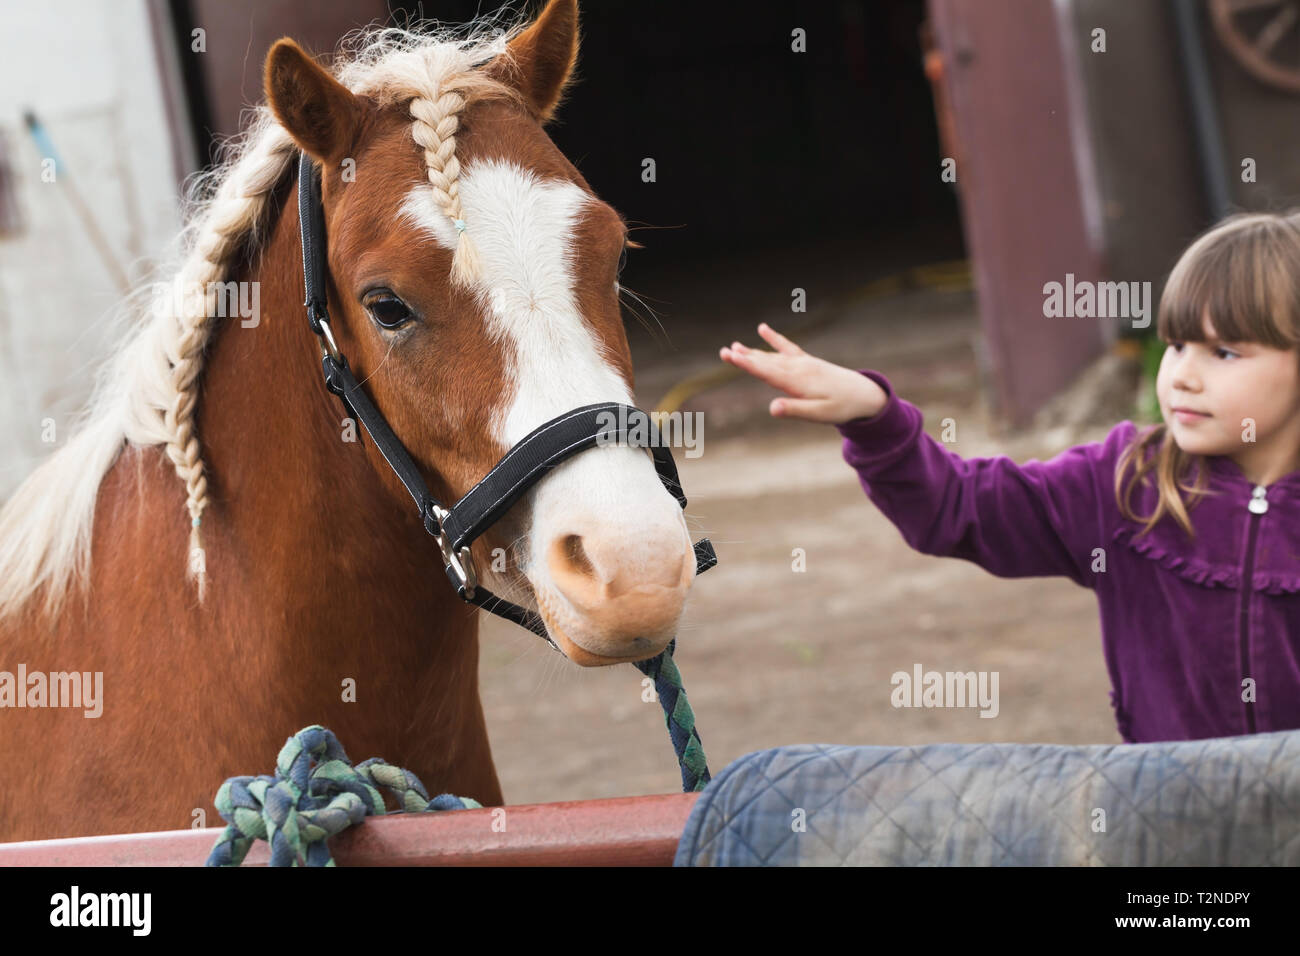 Little girl and brown horse with braided mane, close up Stock Photo